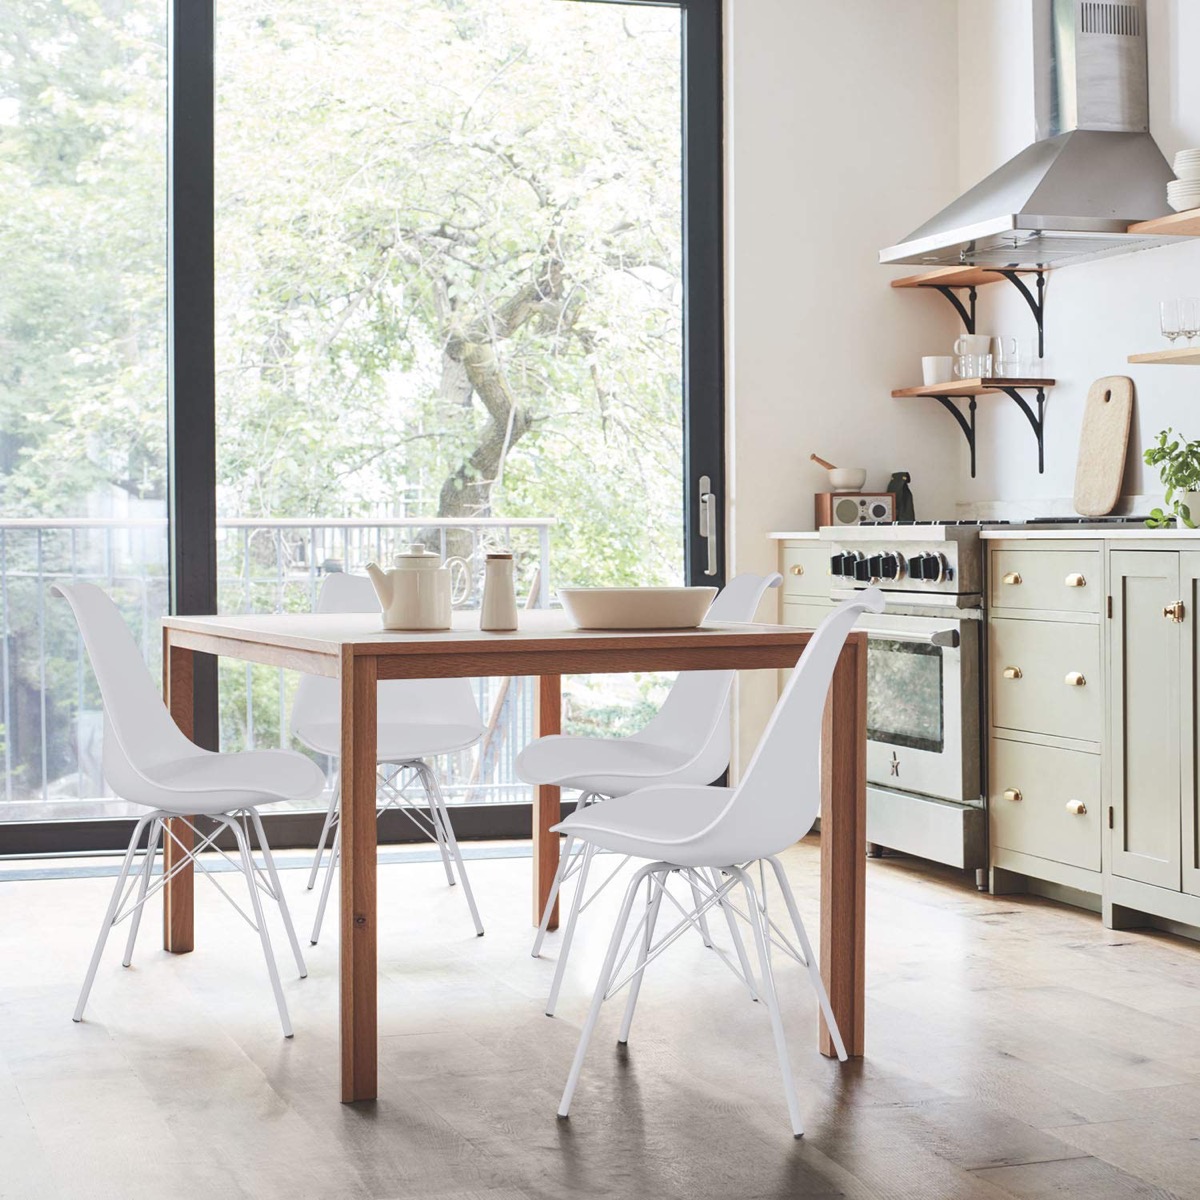 20 Kitchen Chairs To Instantly Update Your Dining Table